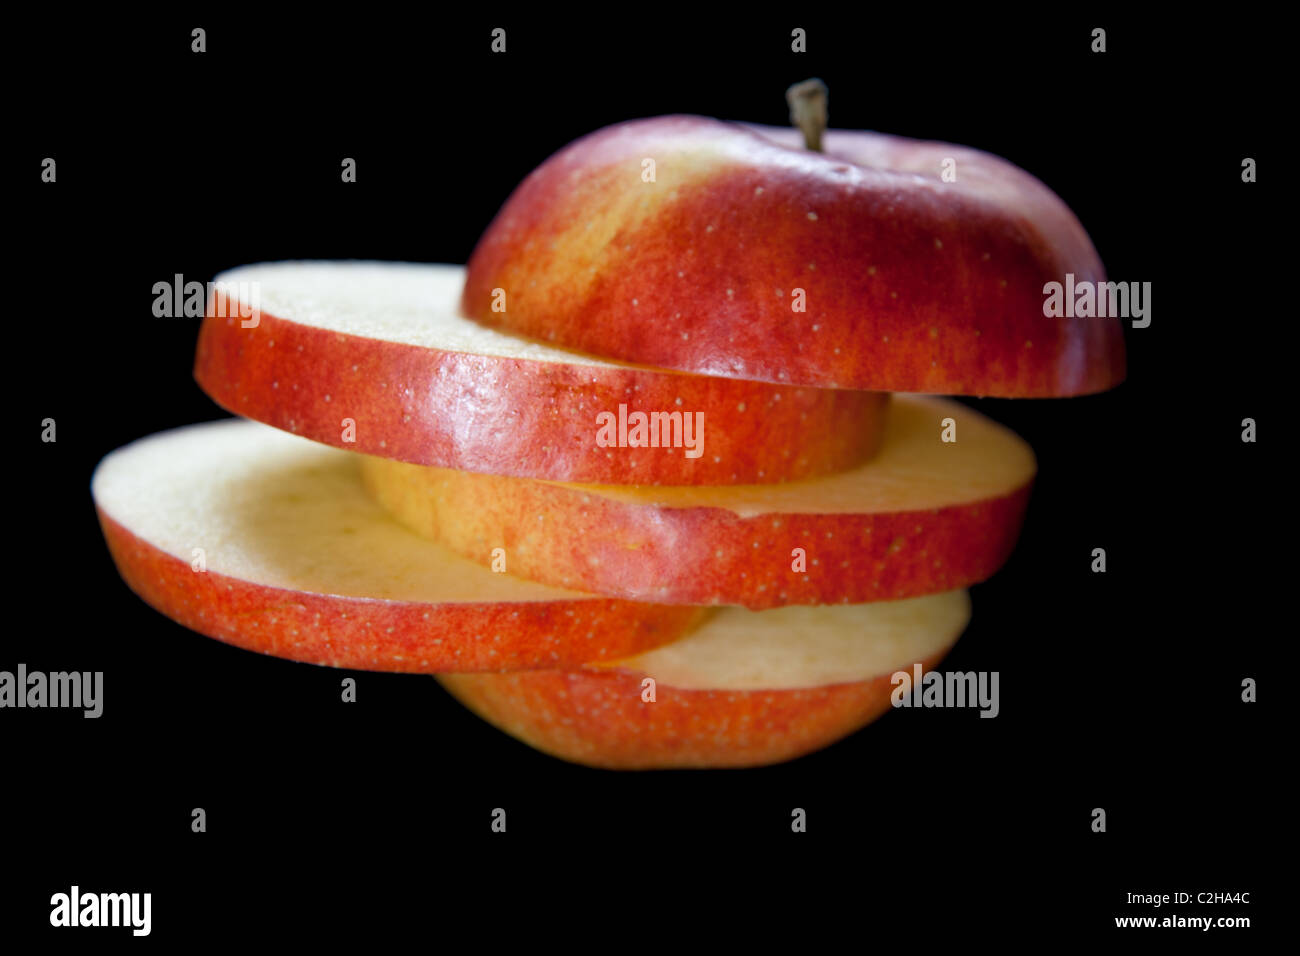 An apple cut into slices and stacked on a black background Stock Photo